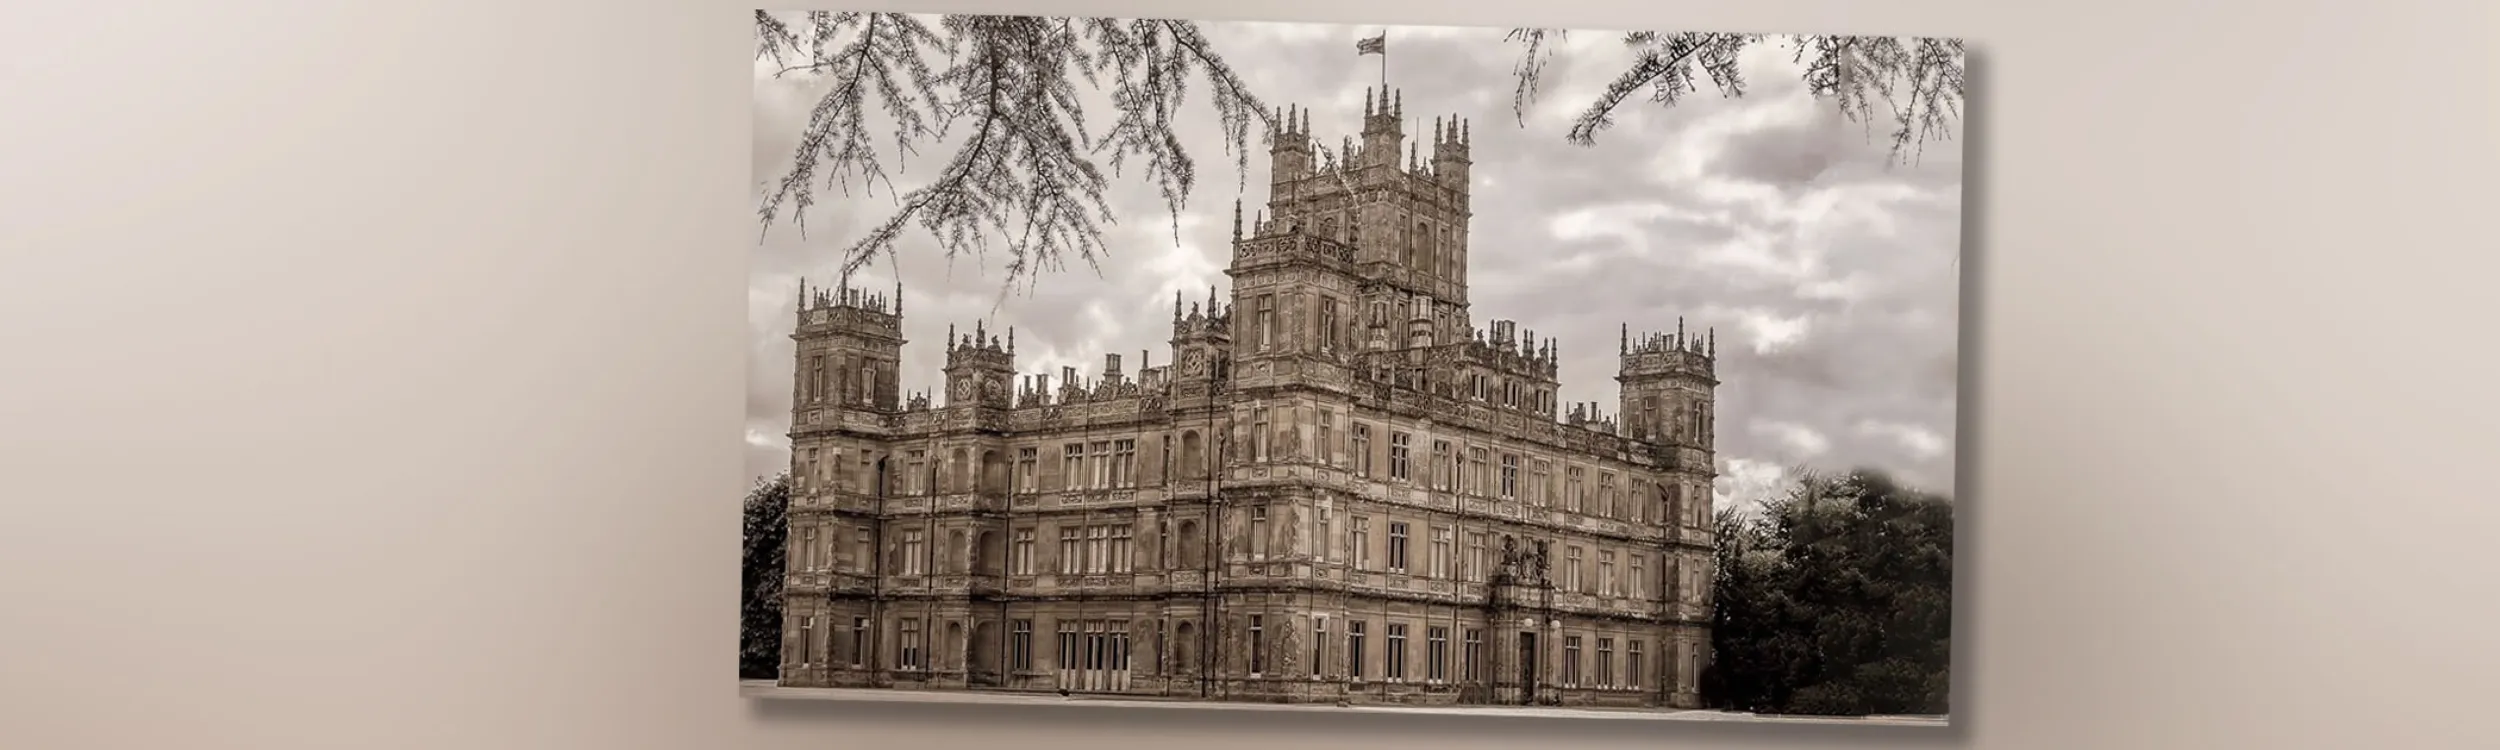 Landowner records on TheGenealogist locate the real Downton Abbey